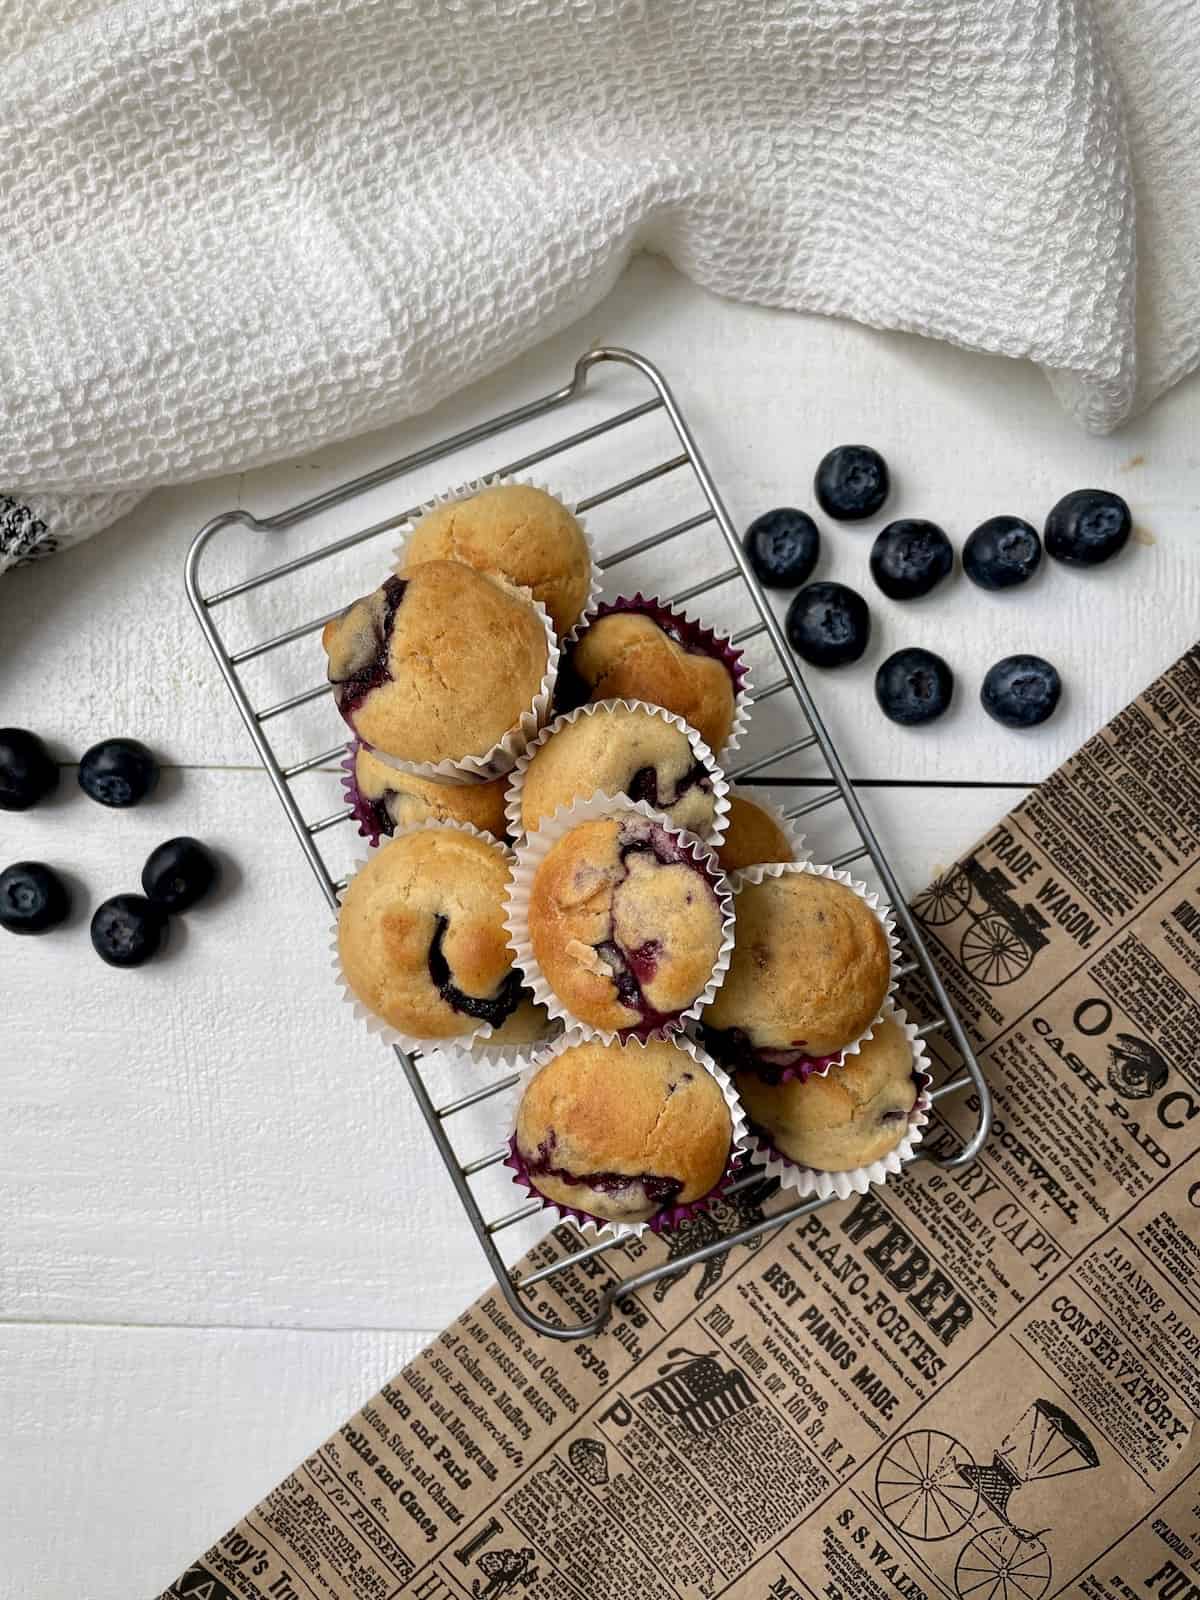 Weight Watchers Blueberry muffins on a grate on a white table with newspaper and napkin.